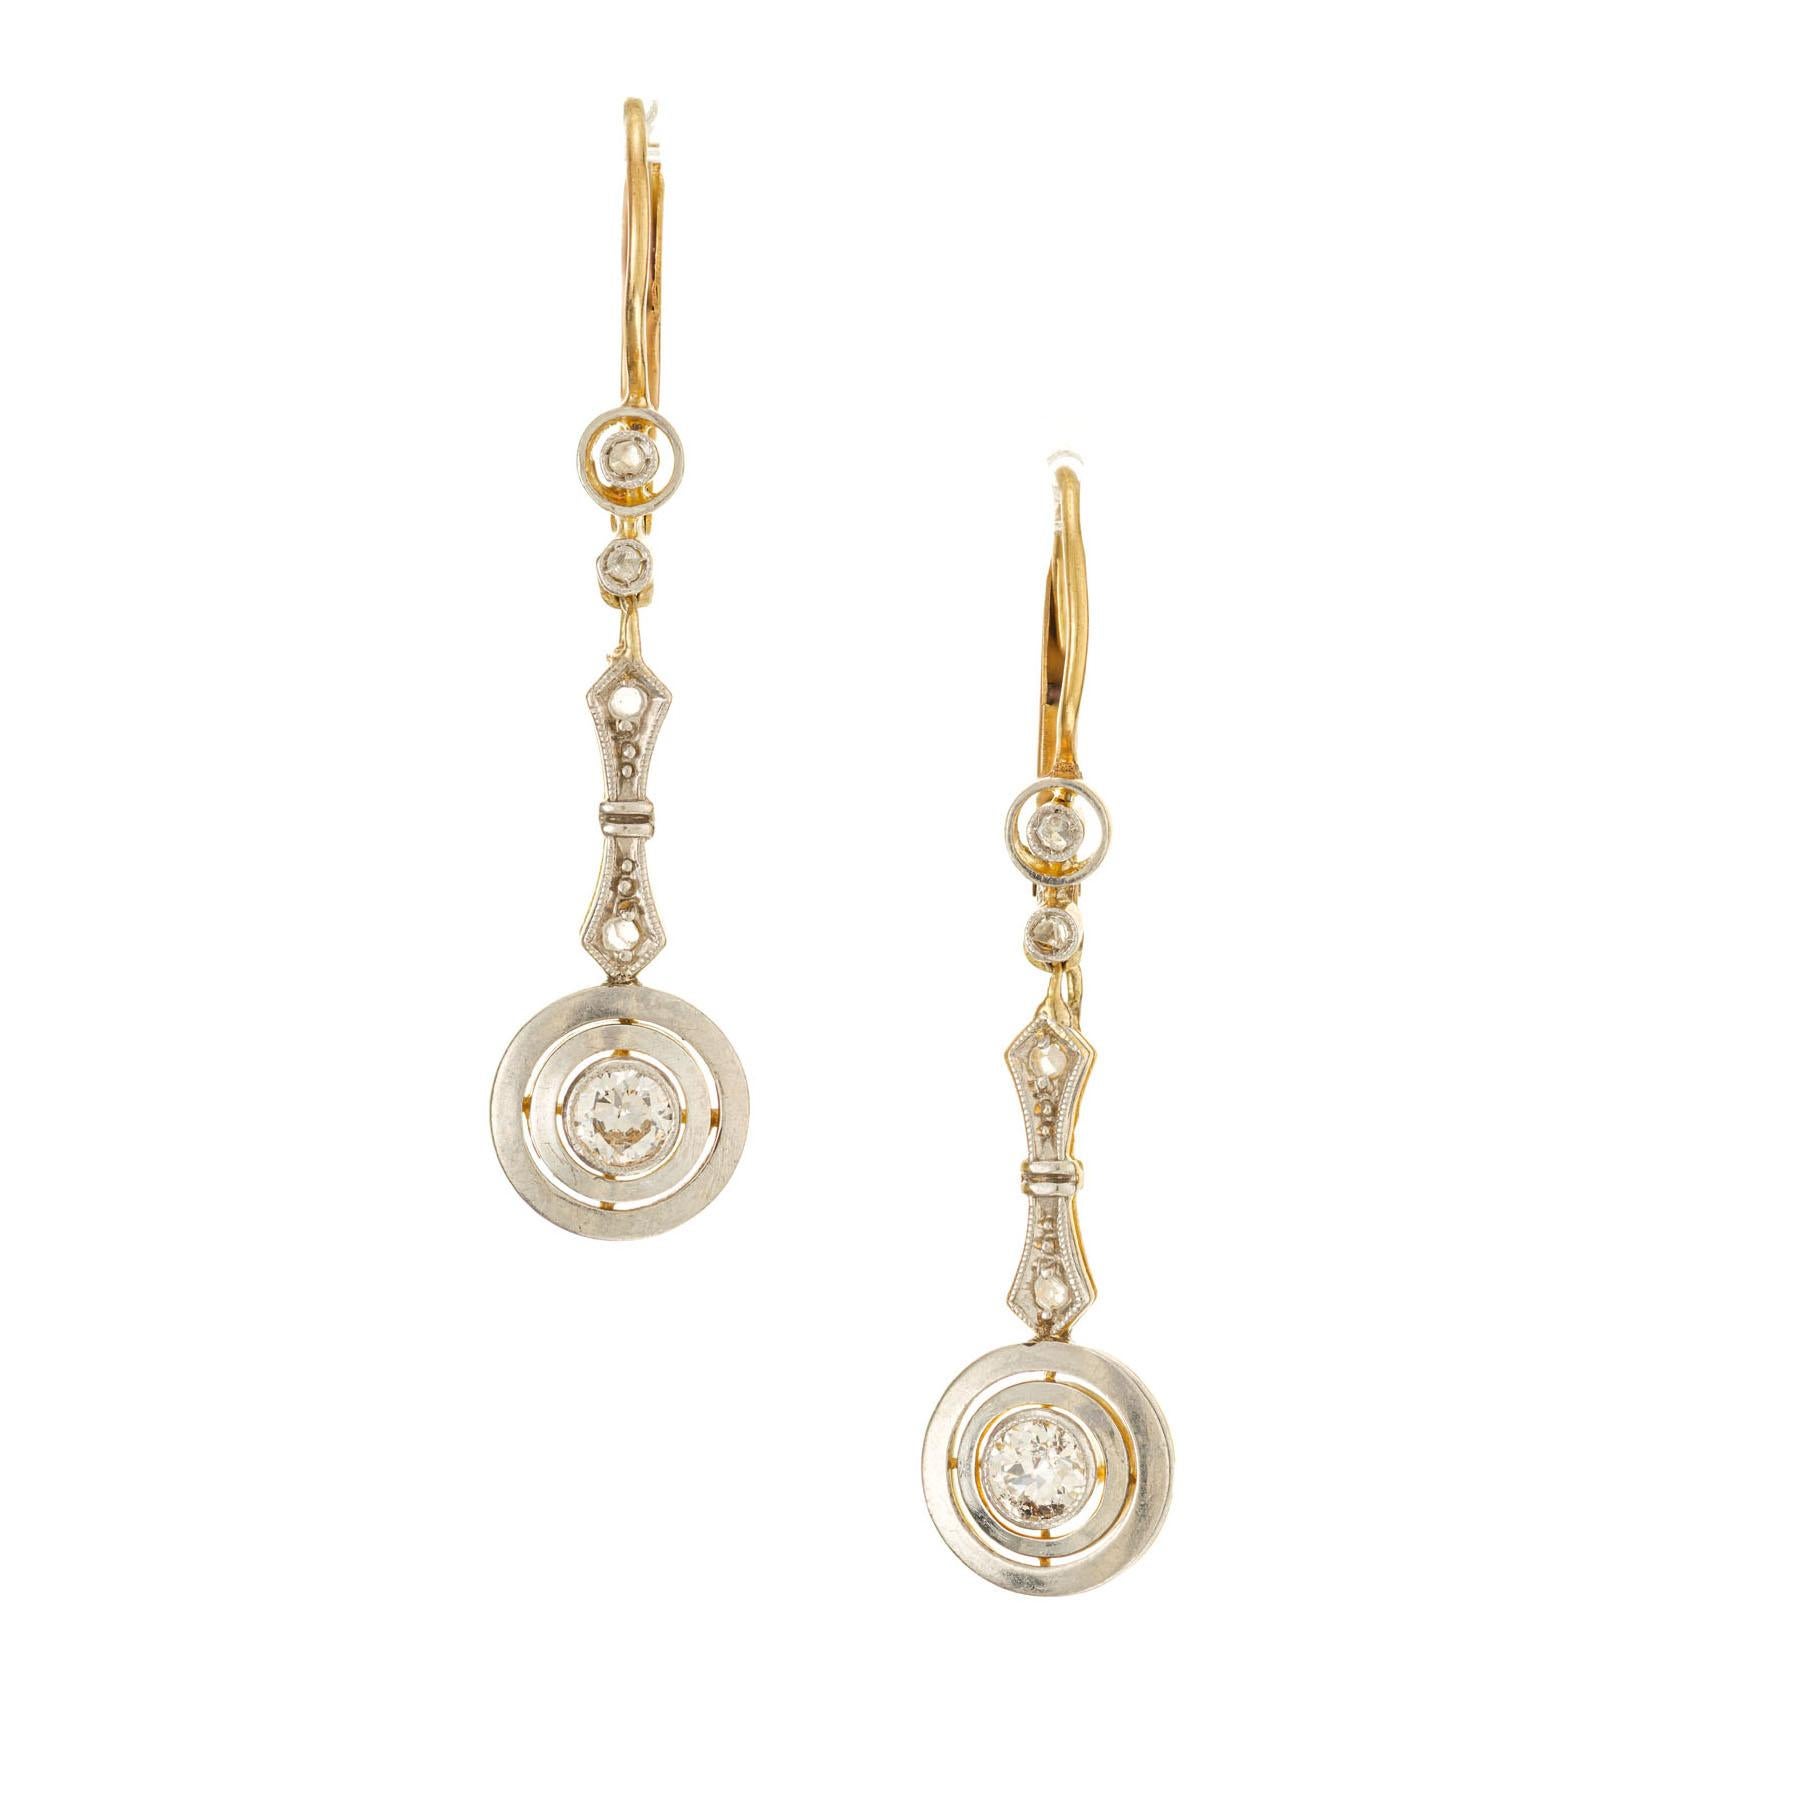 Antique 1920's diamond dangle drop earrings handmade with platinum tops over 14k gold. Natural patina

2 round brilliant cut diamonds, I SI-I approx. .20cts
8 rose cut diamonds, approx. .5cts
Platinum 
14k yellow gold 
2.7 grams
Top to bottom: